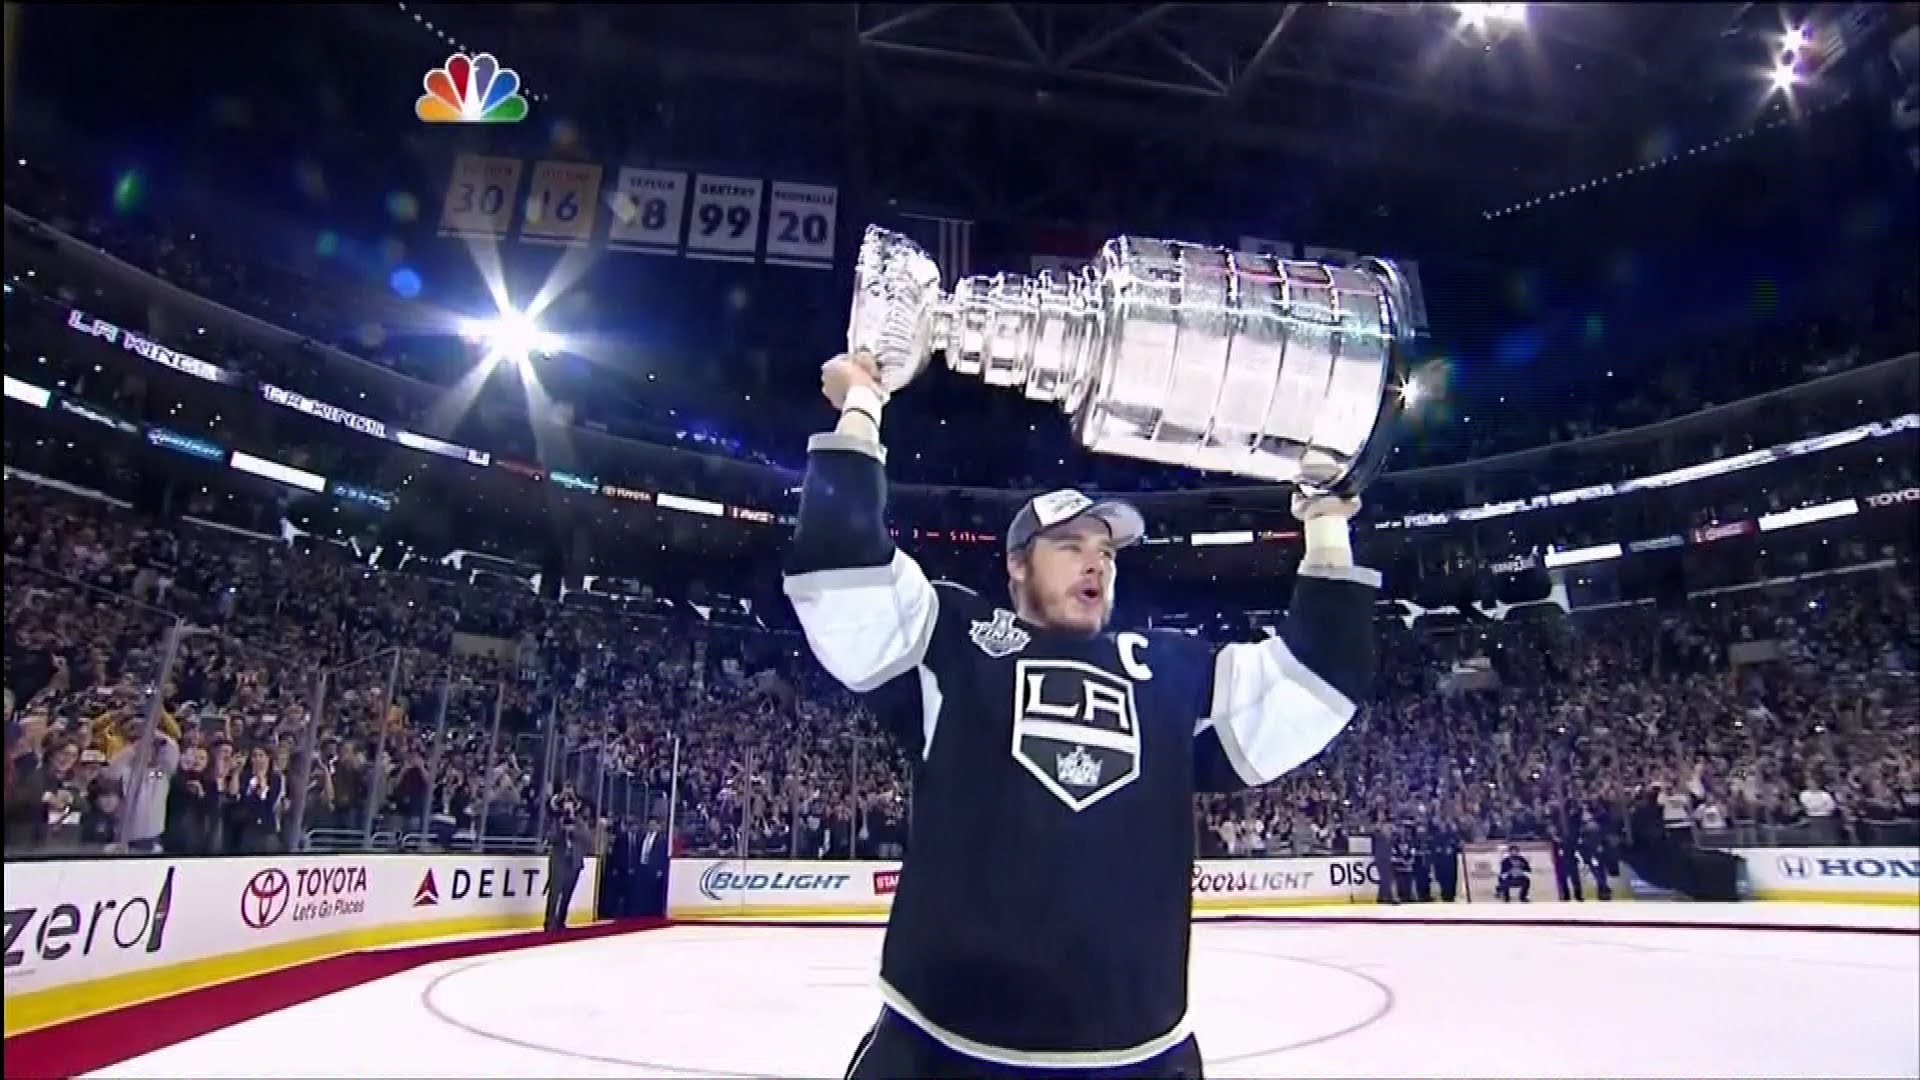 1920x1080 Los Angeles Kings 2014 Stanley Cup Champions (Conn Smythe + Stanley Cup  Presentation) - YouTube